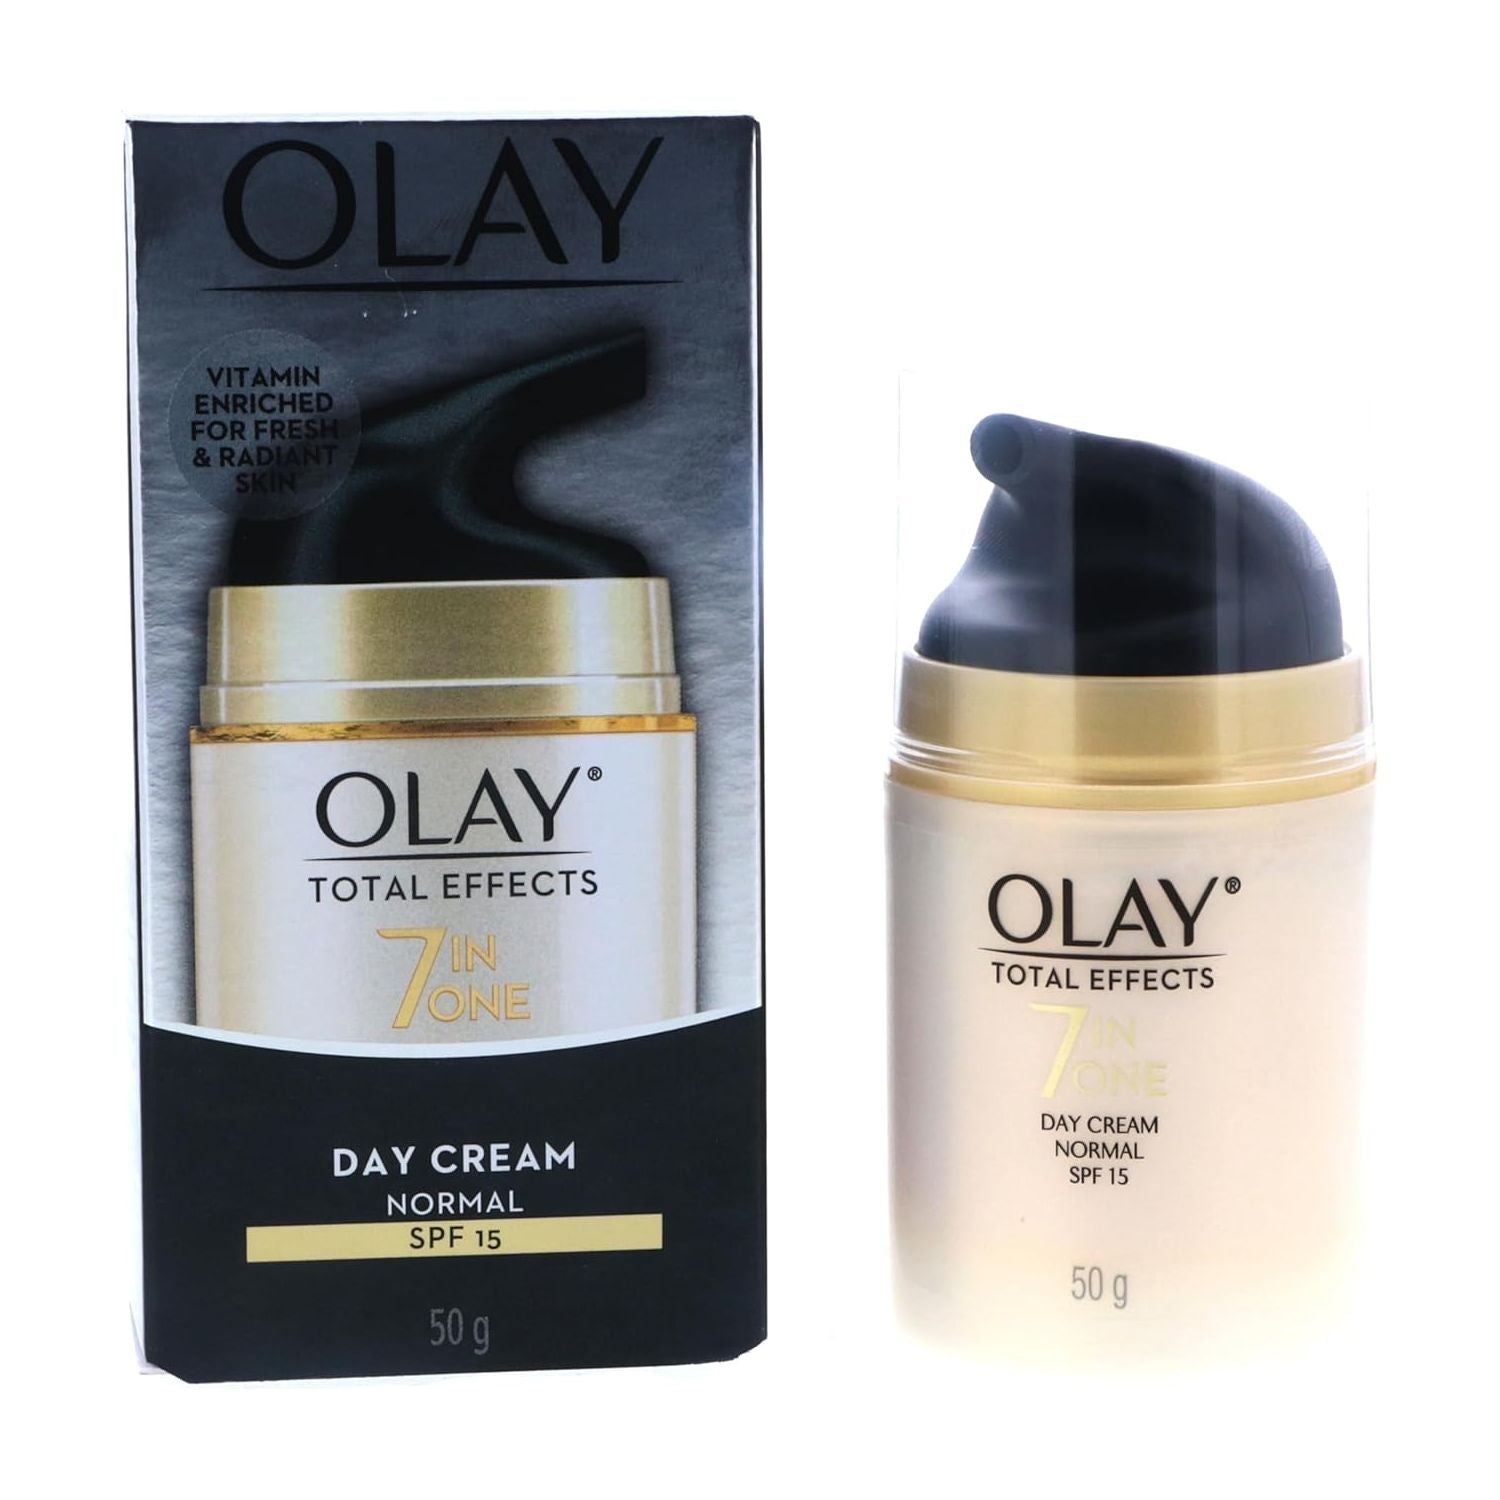 Olay Total Effects 7 in 1 Anti Aging Day Cream Normal 50g